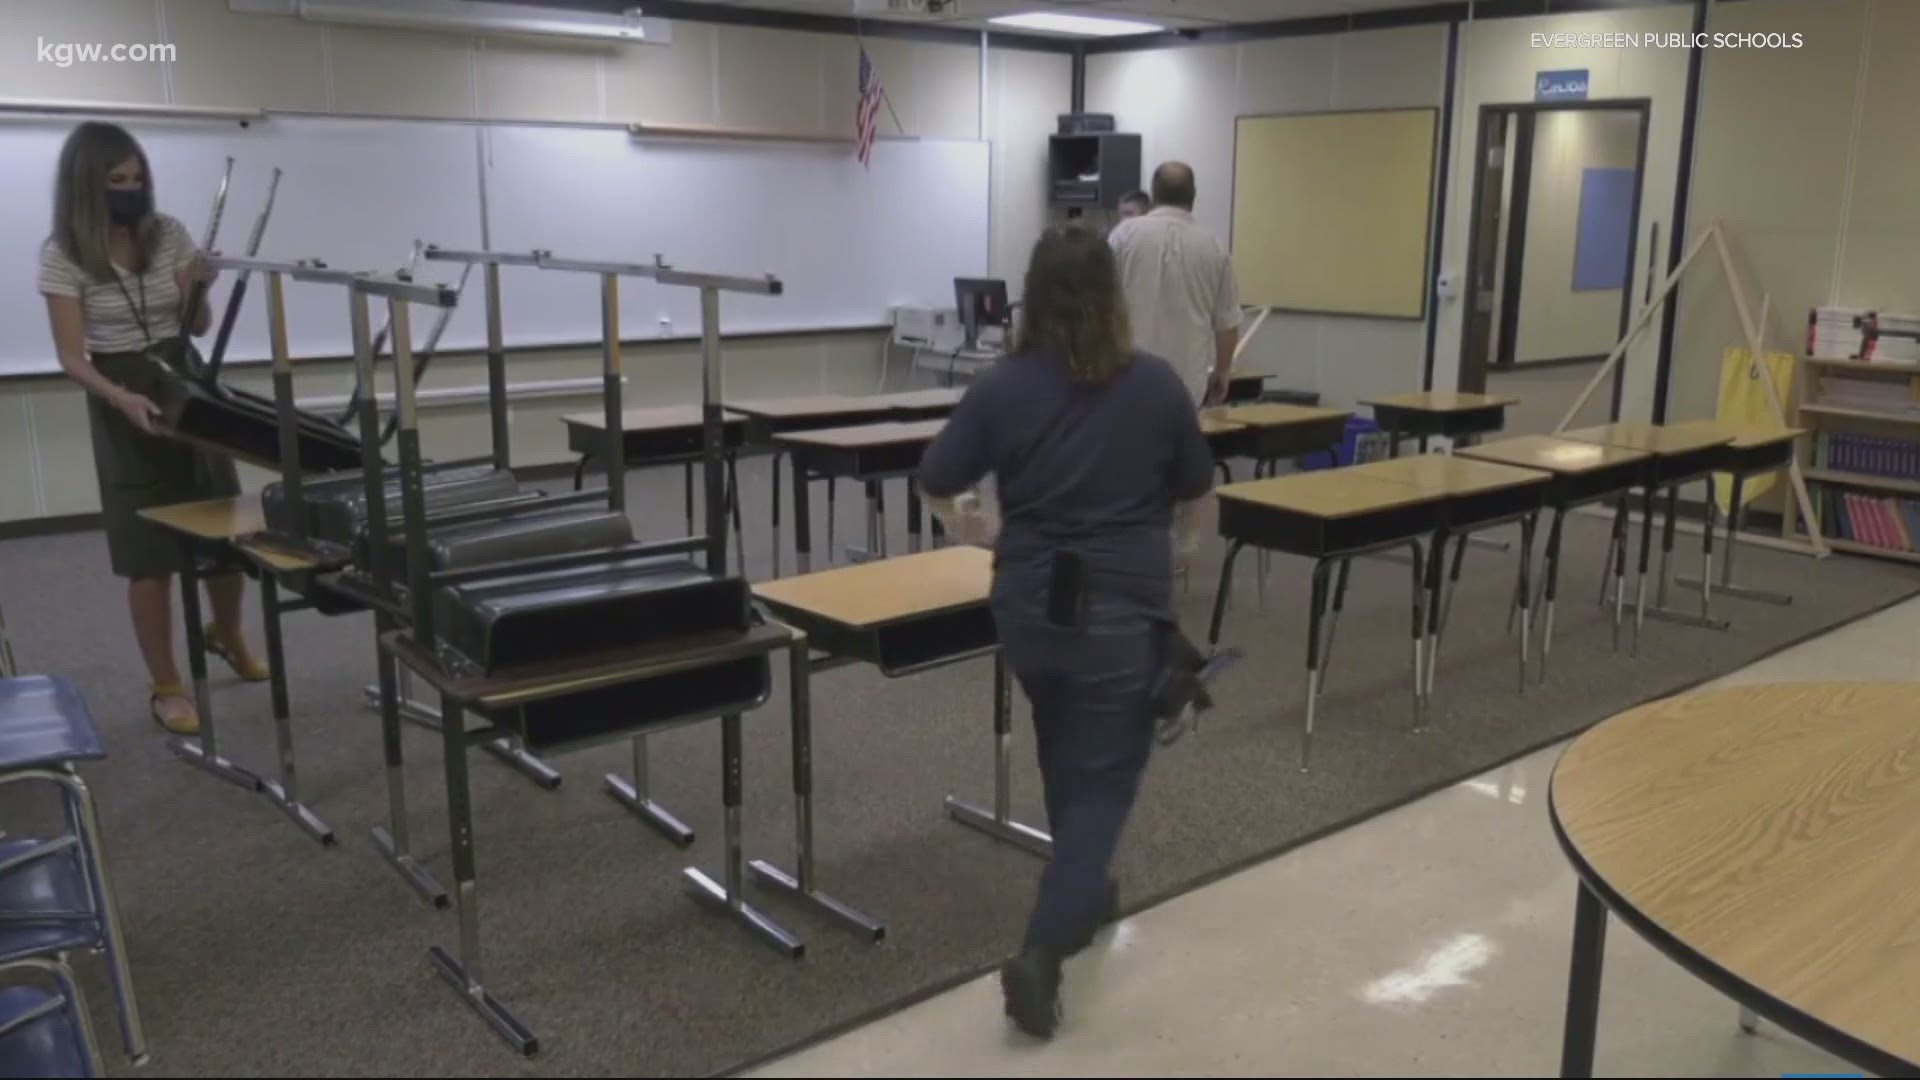 A surge in COVID-19 cases has slowed the reopening of schools in Clark County, Washington. Tim Gordon has the latest.